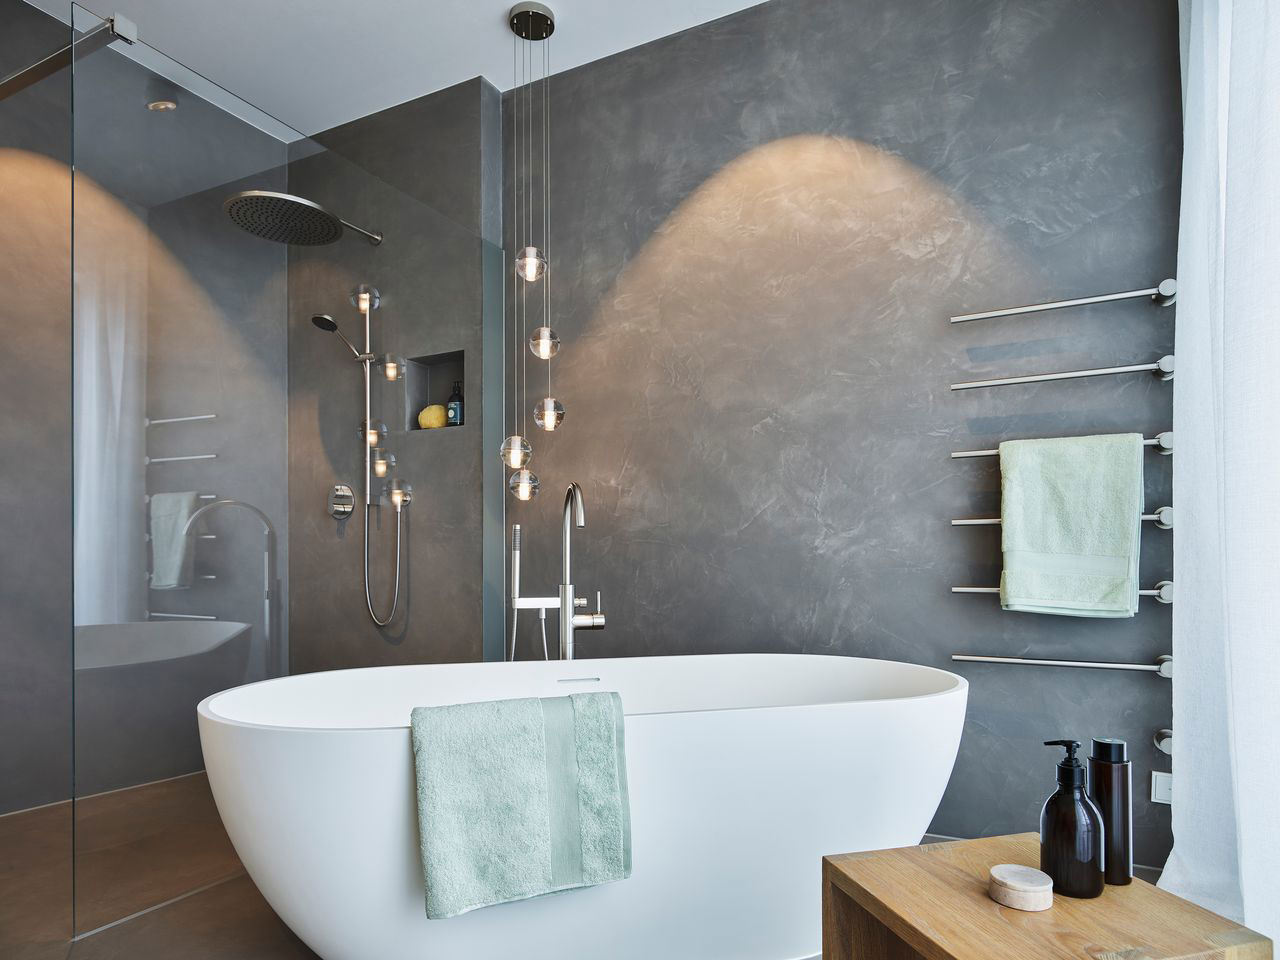 Help! Is it Possible to Have a Soaking Tub That’s Both Chic and Safe?